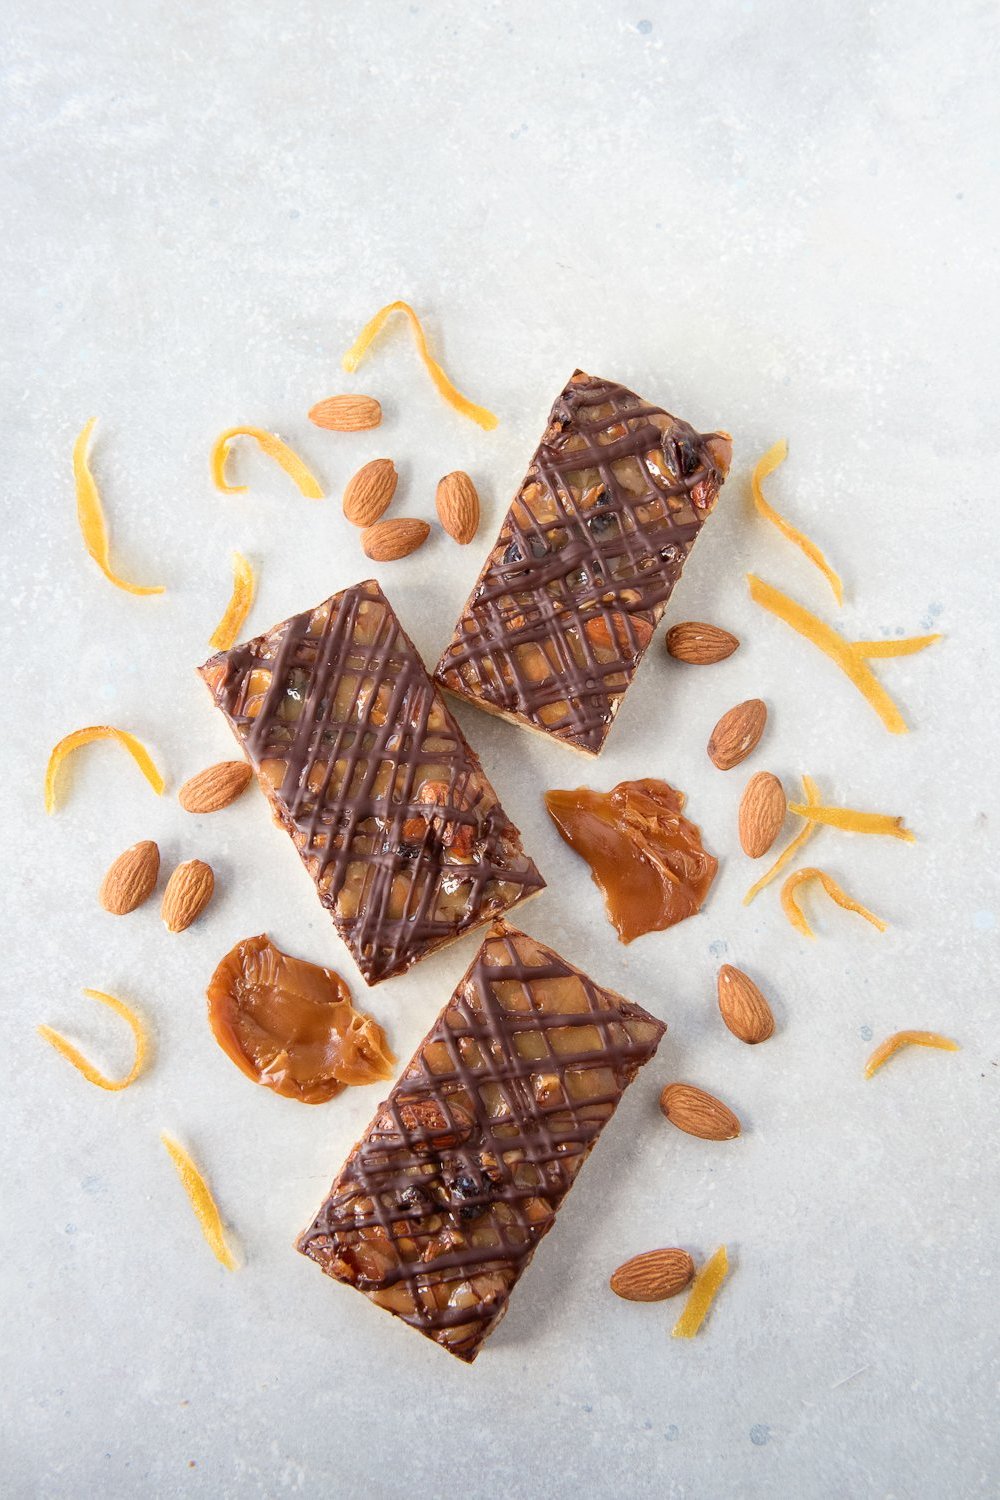 top view 3 gluten free florentine bars showing chocolate drizzle on top of caramel, almonds, cranberry & candied citrus topping